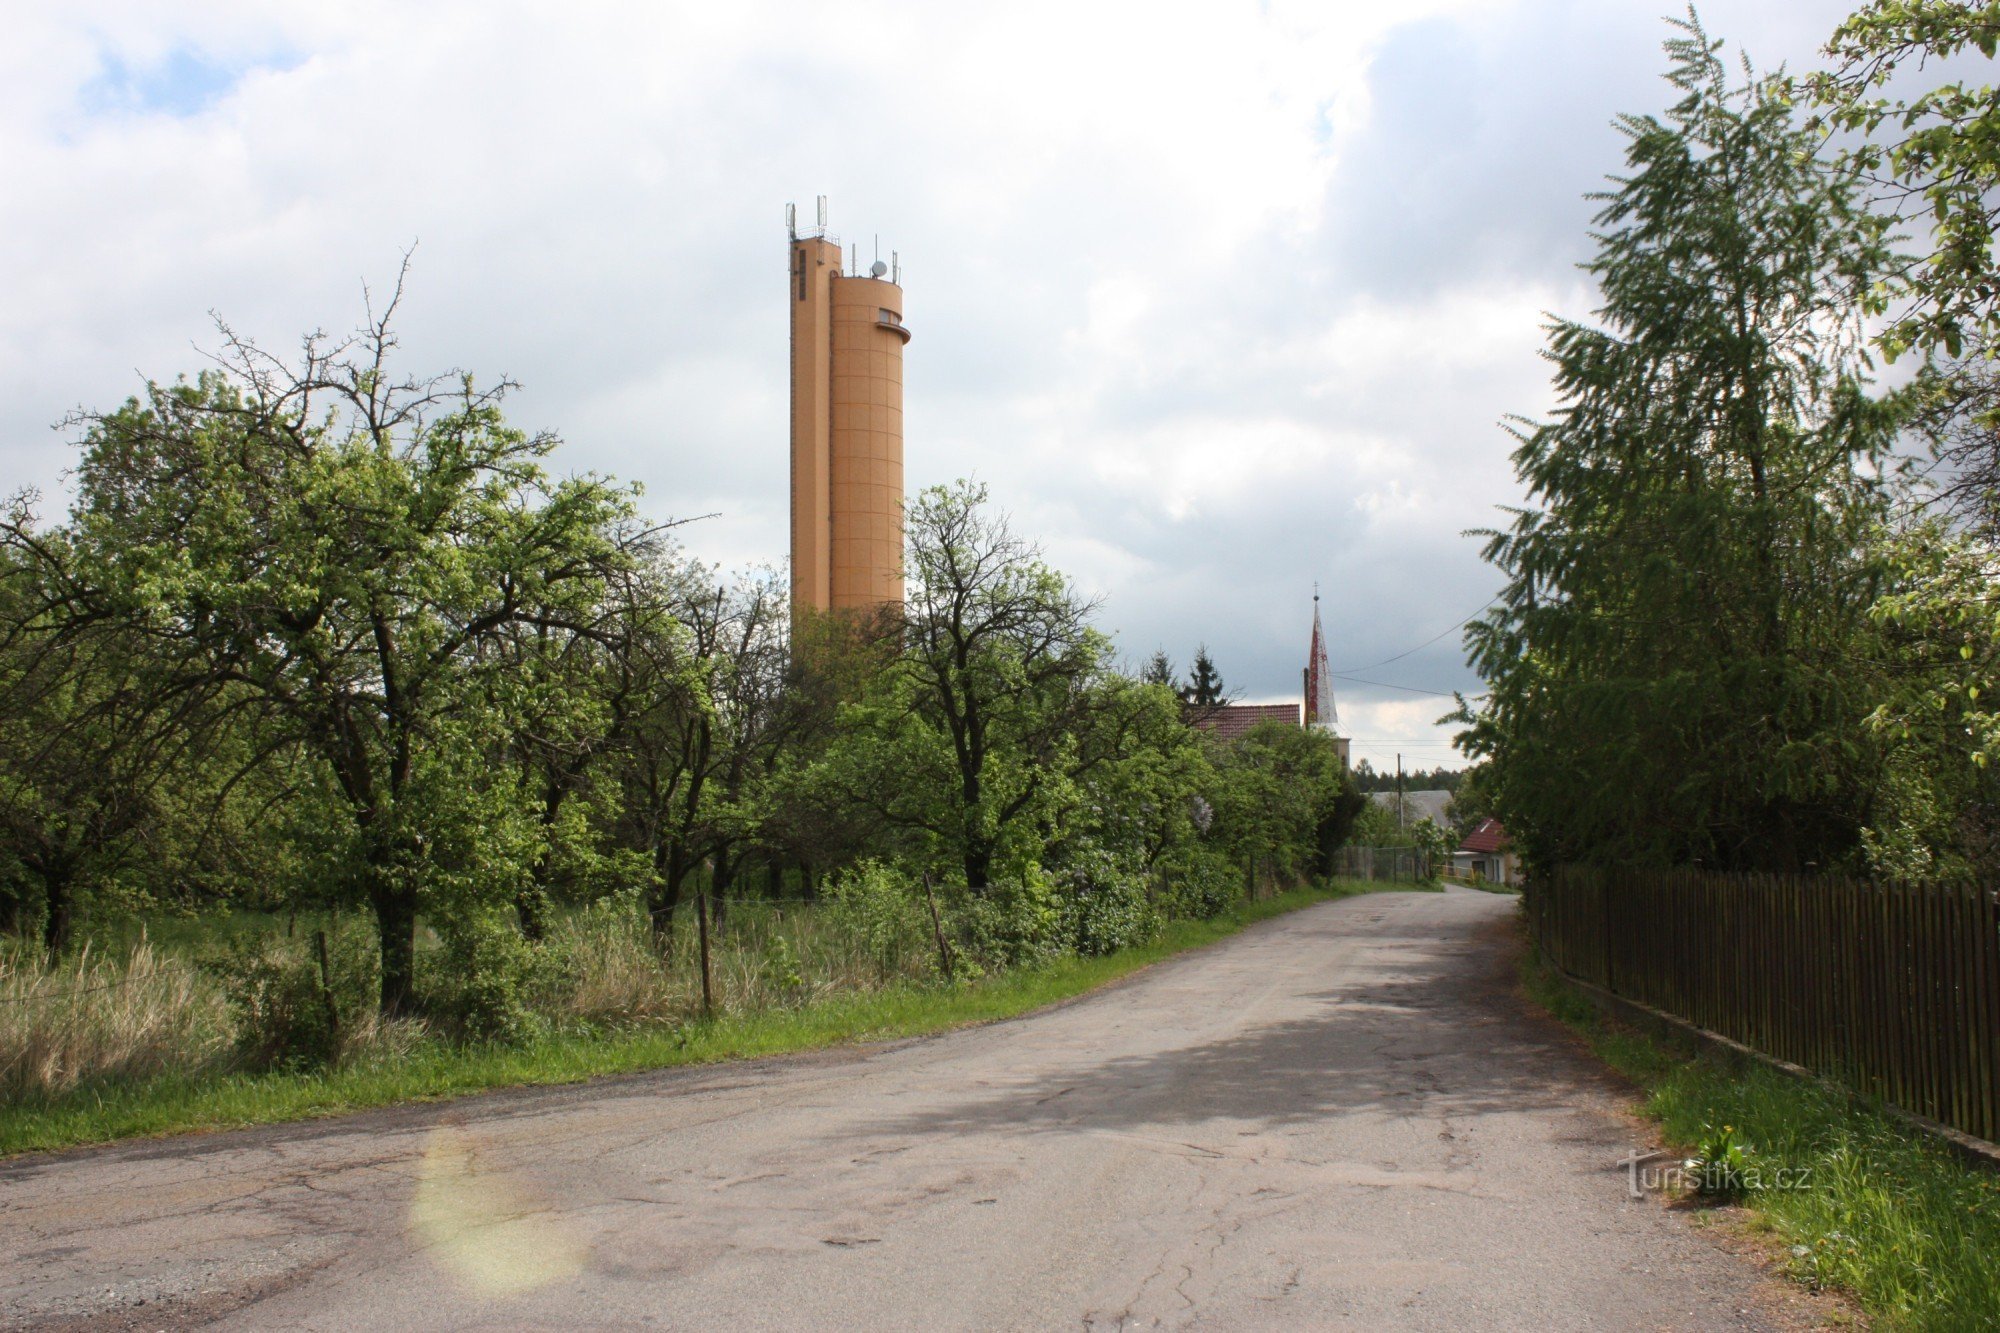 Two landmarks of the settlement of Práčov - the church and the water tower